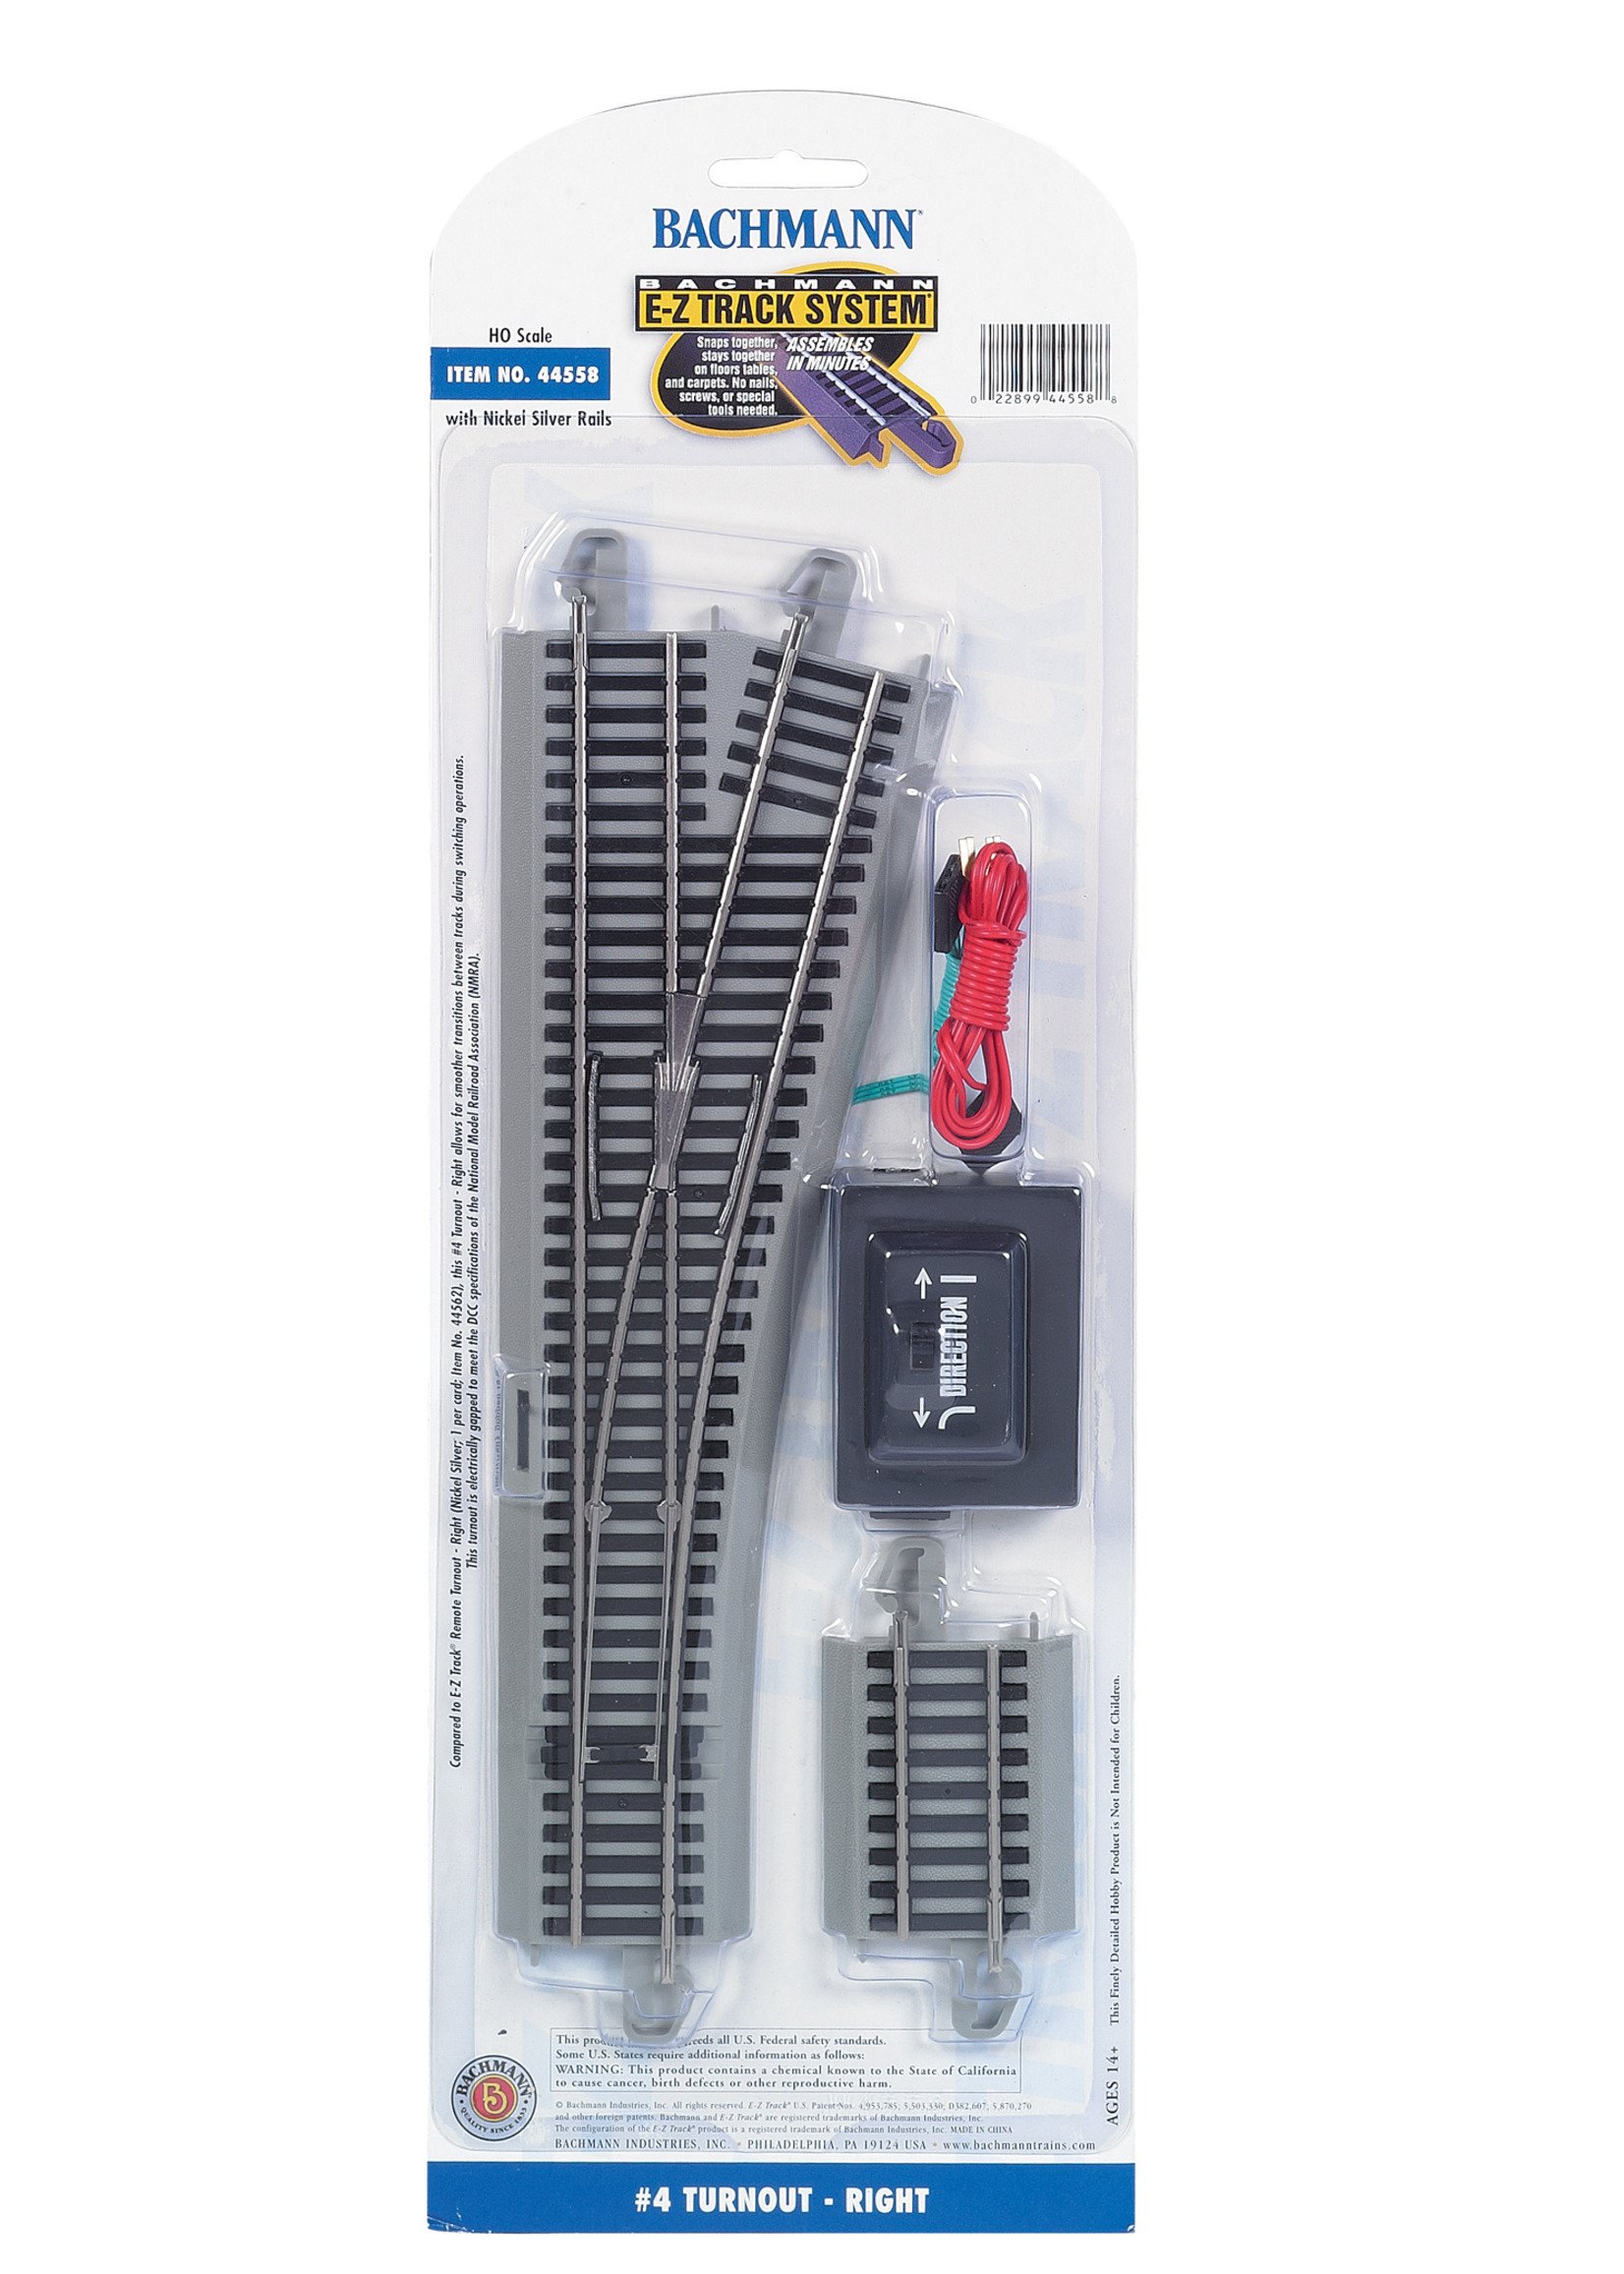 Bachmann 44558 - #4 Turnout - Right - HO Scale EZ Track